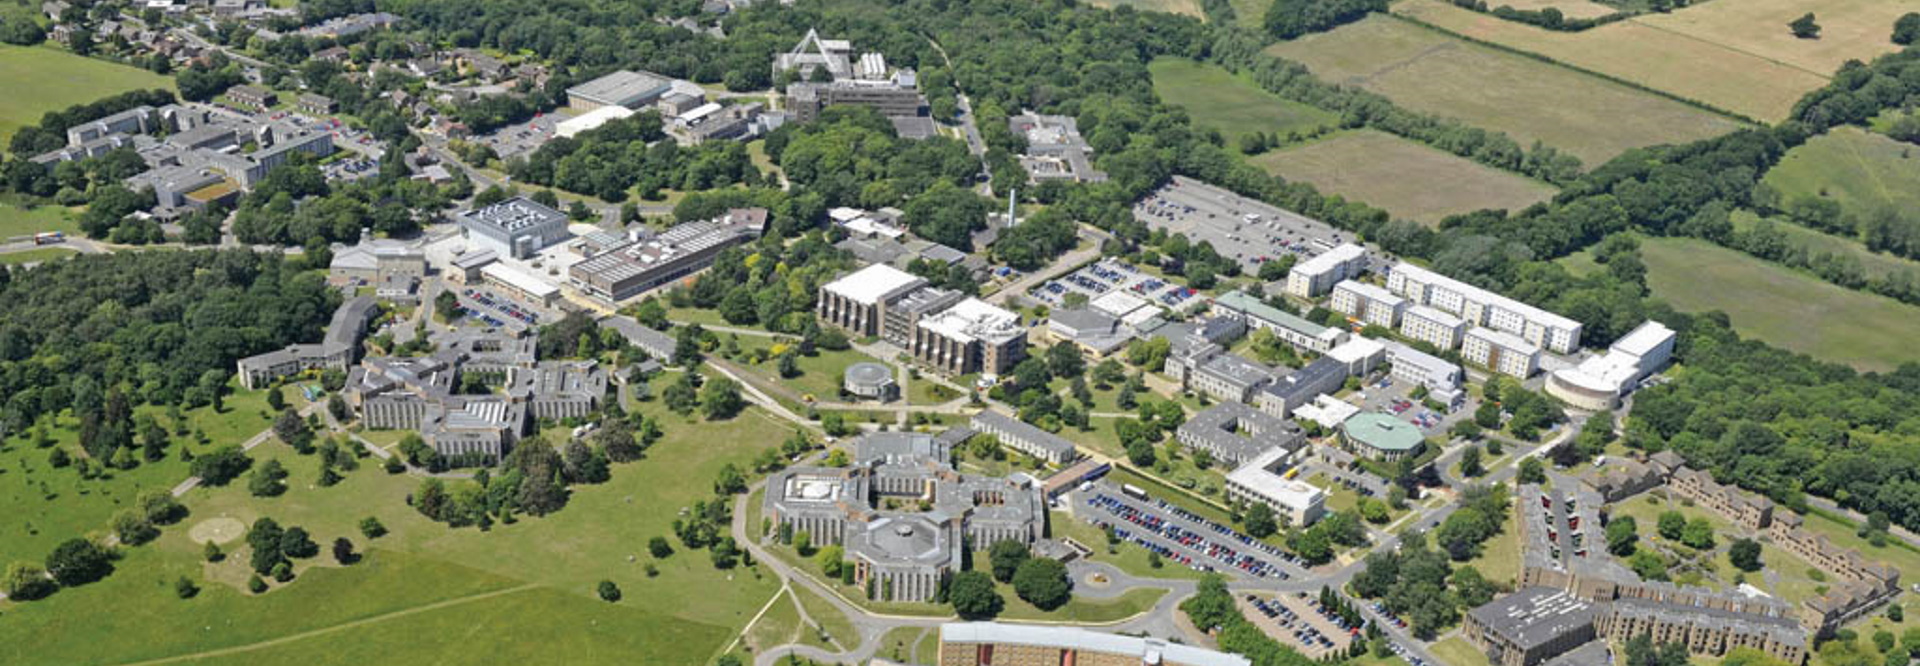 Bird eye's view of the Canterbury campus of the University of Kent